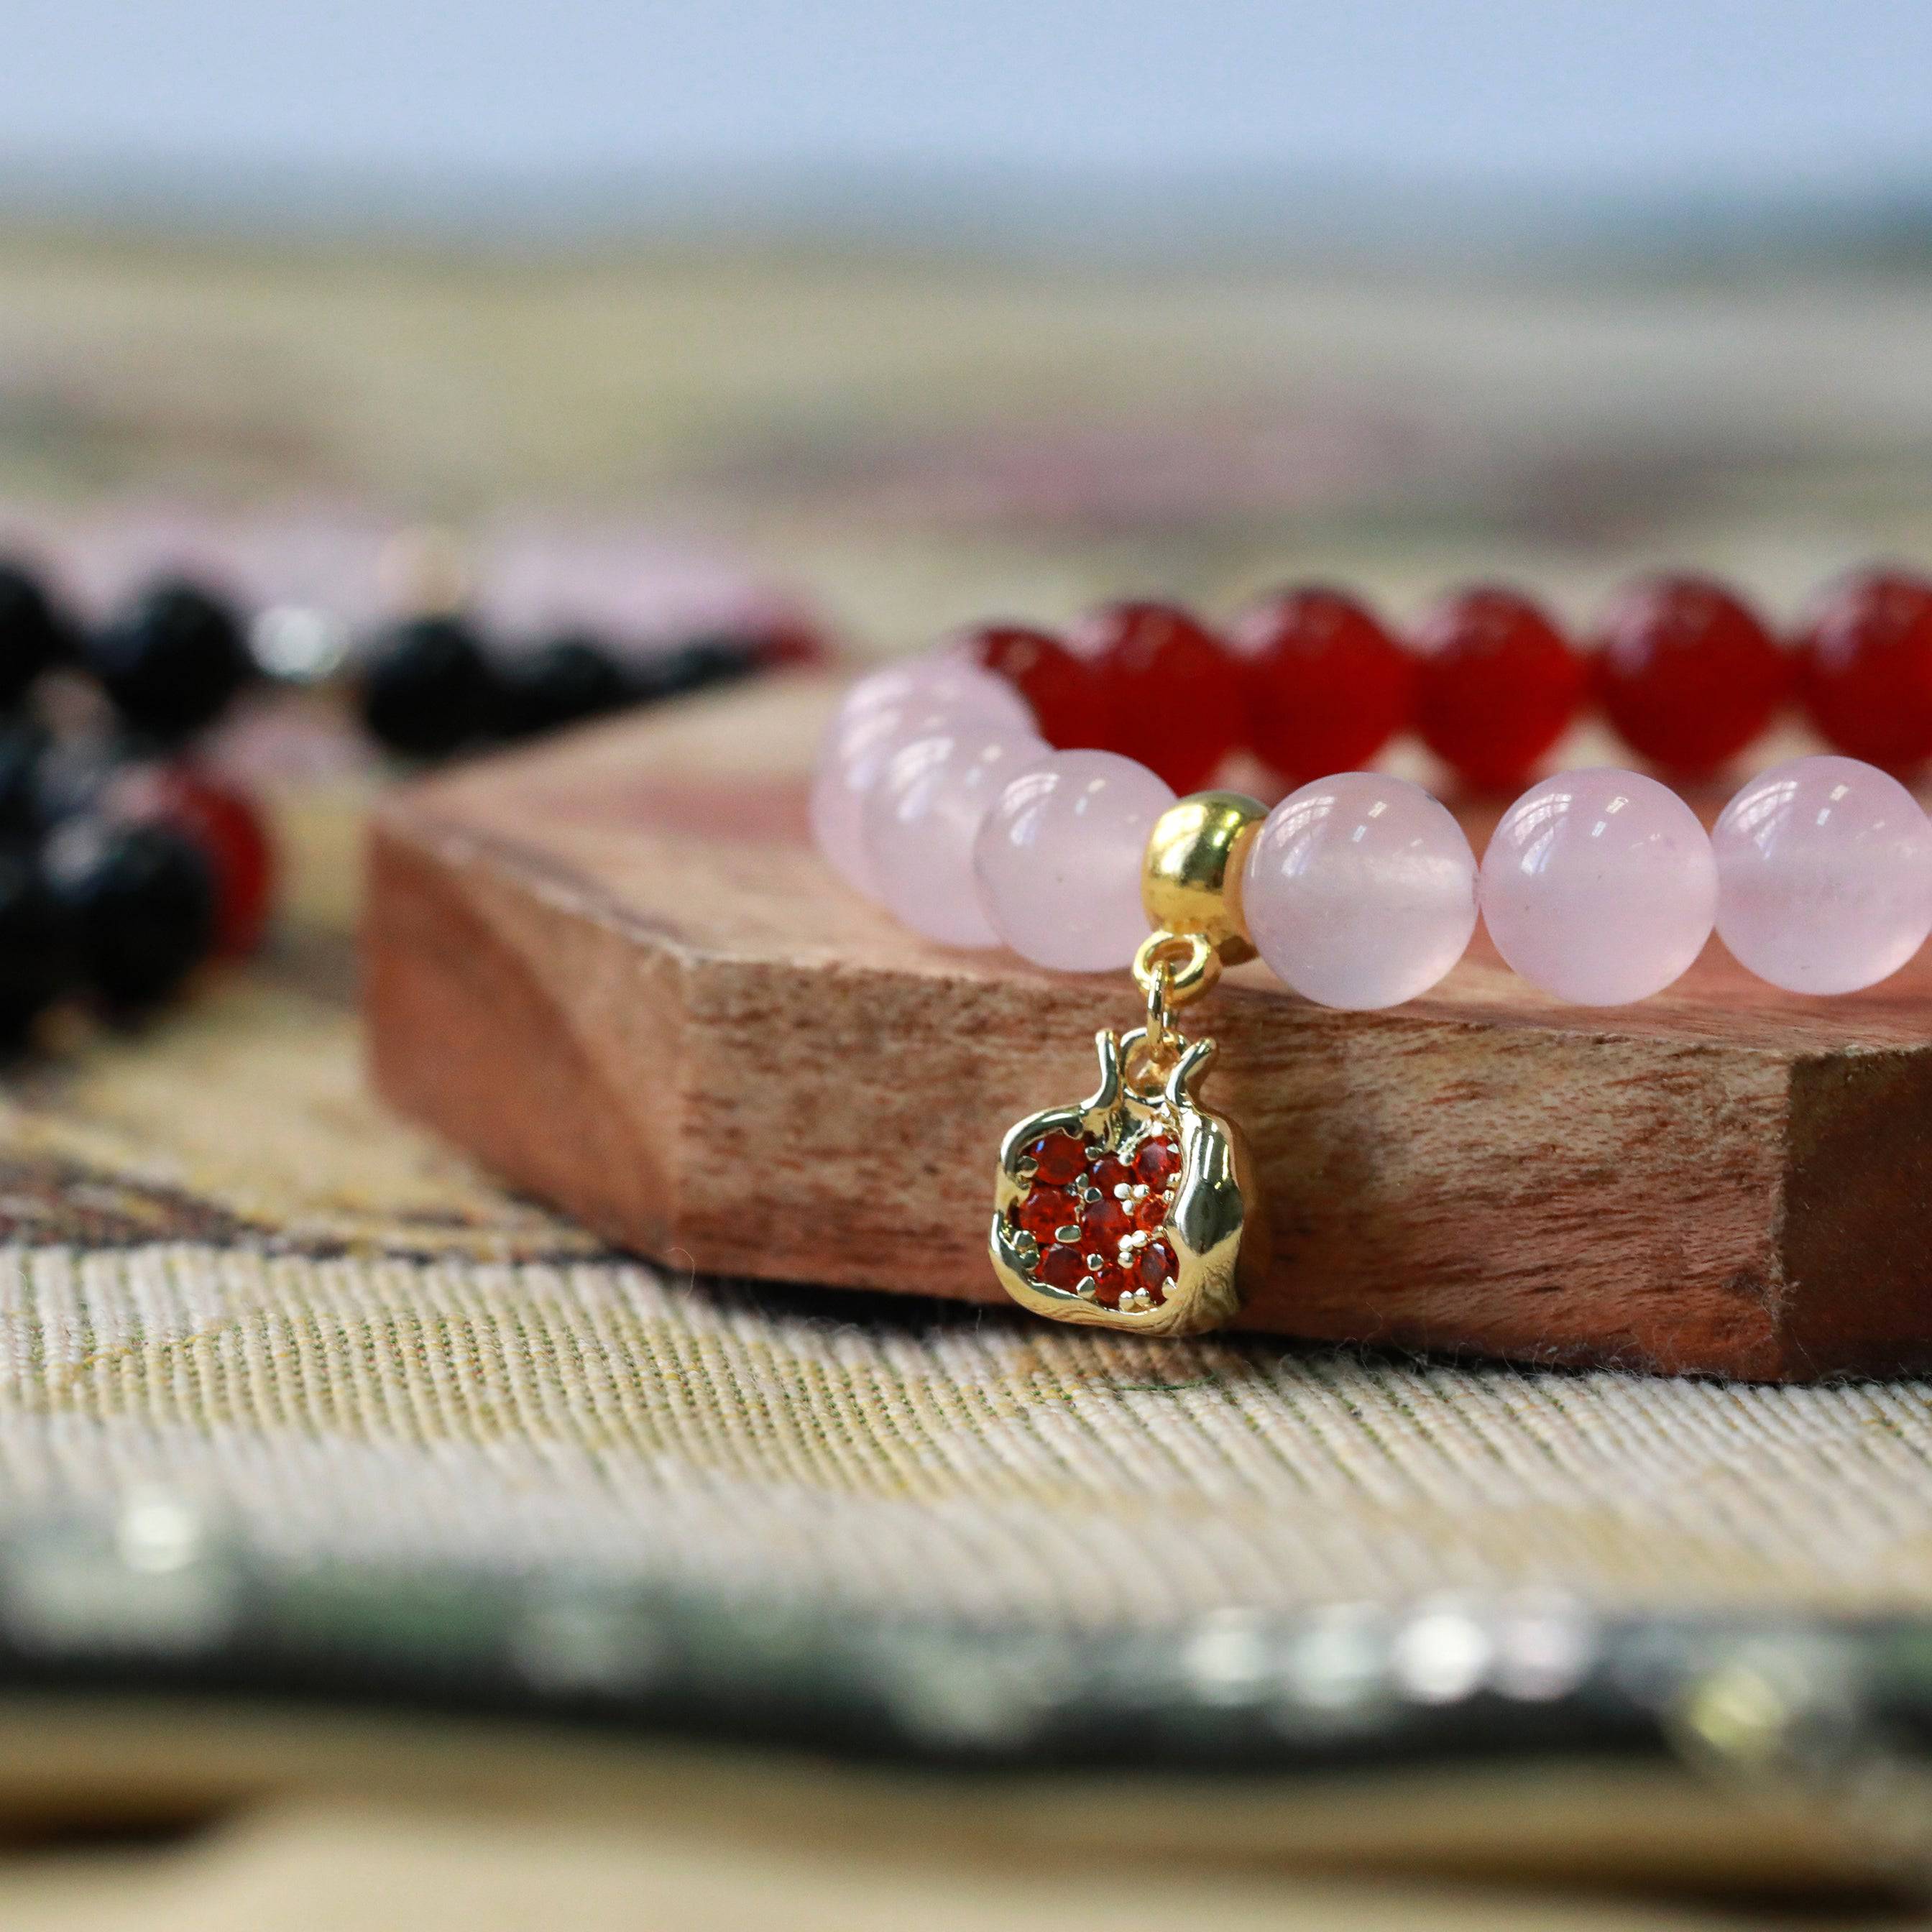 pomegranate gemstone stretchy charm bracelet in gold or silver inspired by Persephone and Hecate closeup 2 persephone